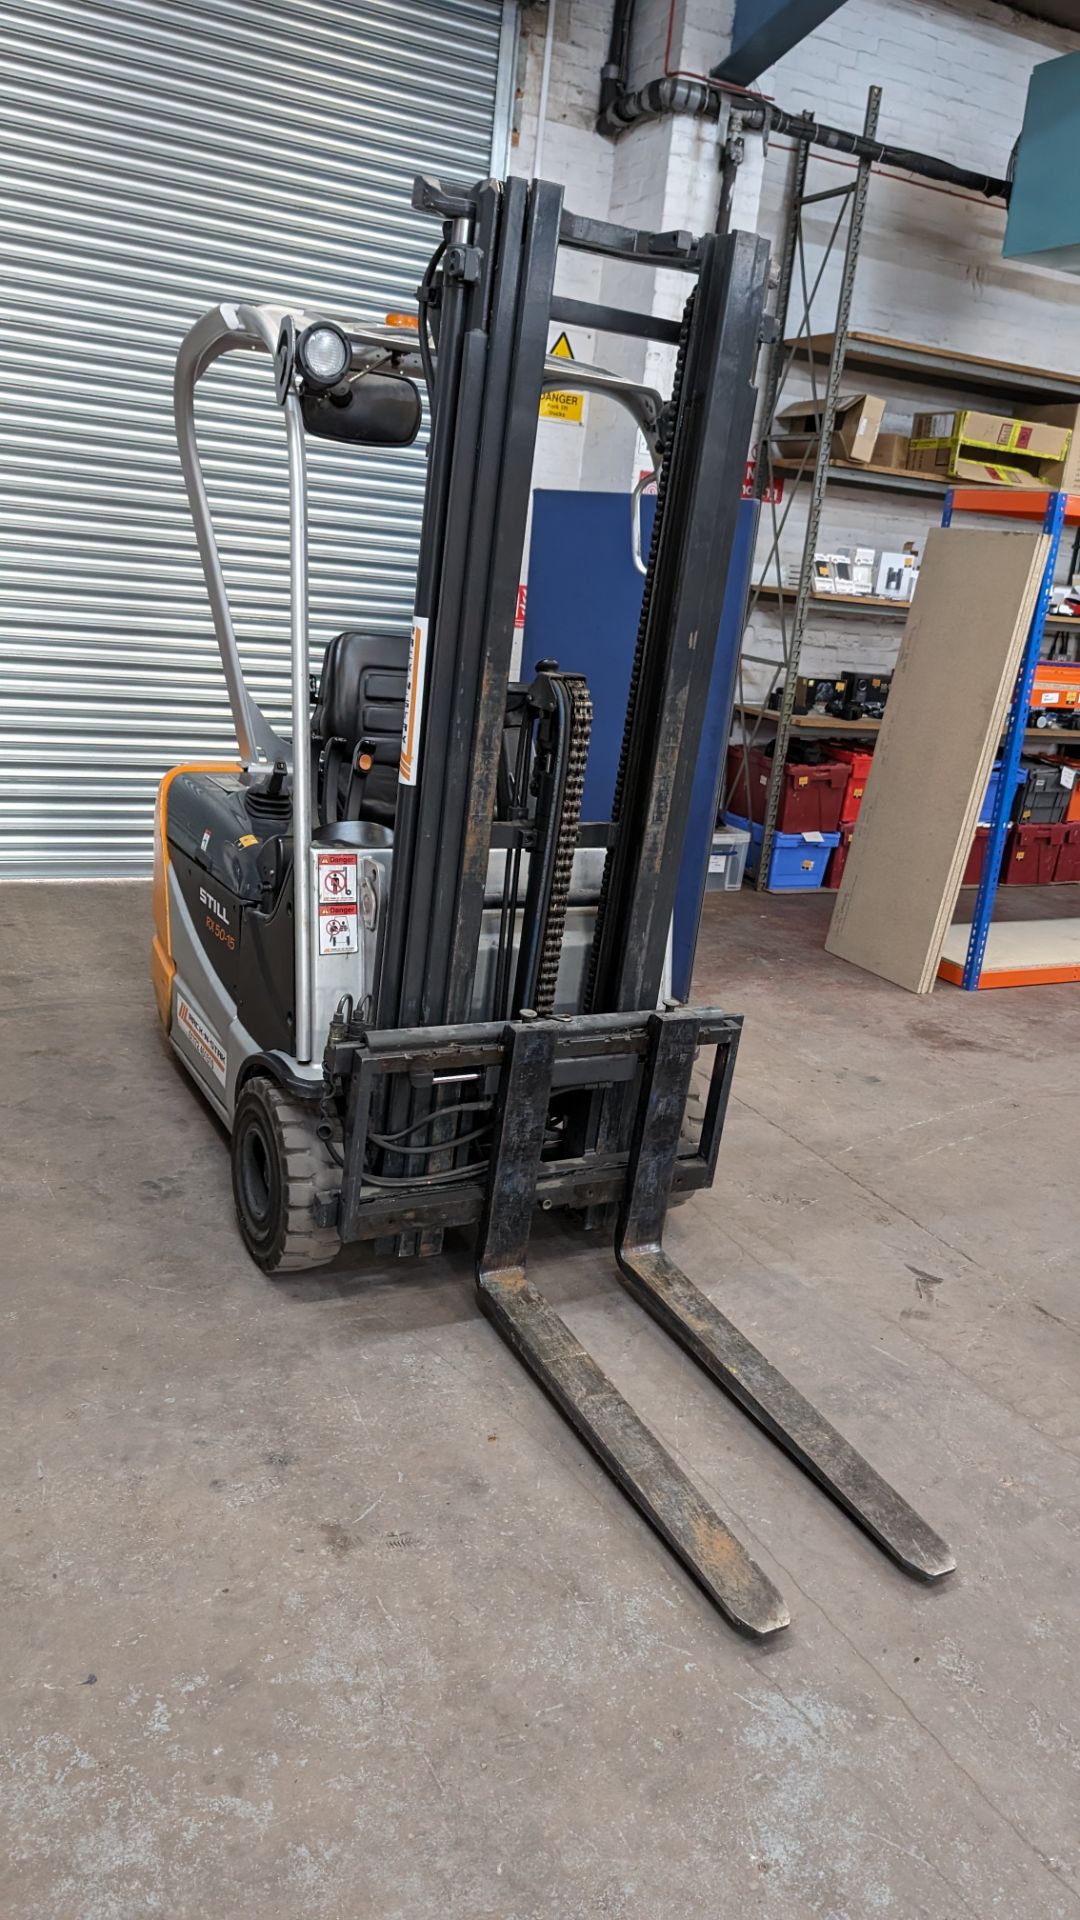 Still model RX-5015 3-wheel electric forklift truck with sideshift, 1.5 tonne capacity, including St - Bild 11 aus 18